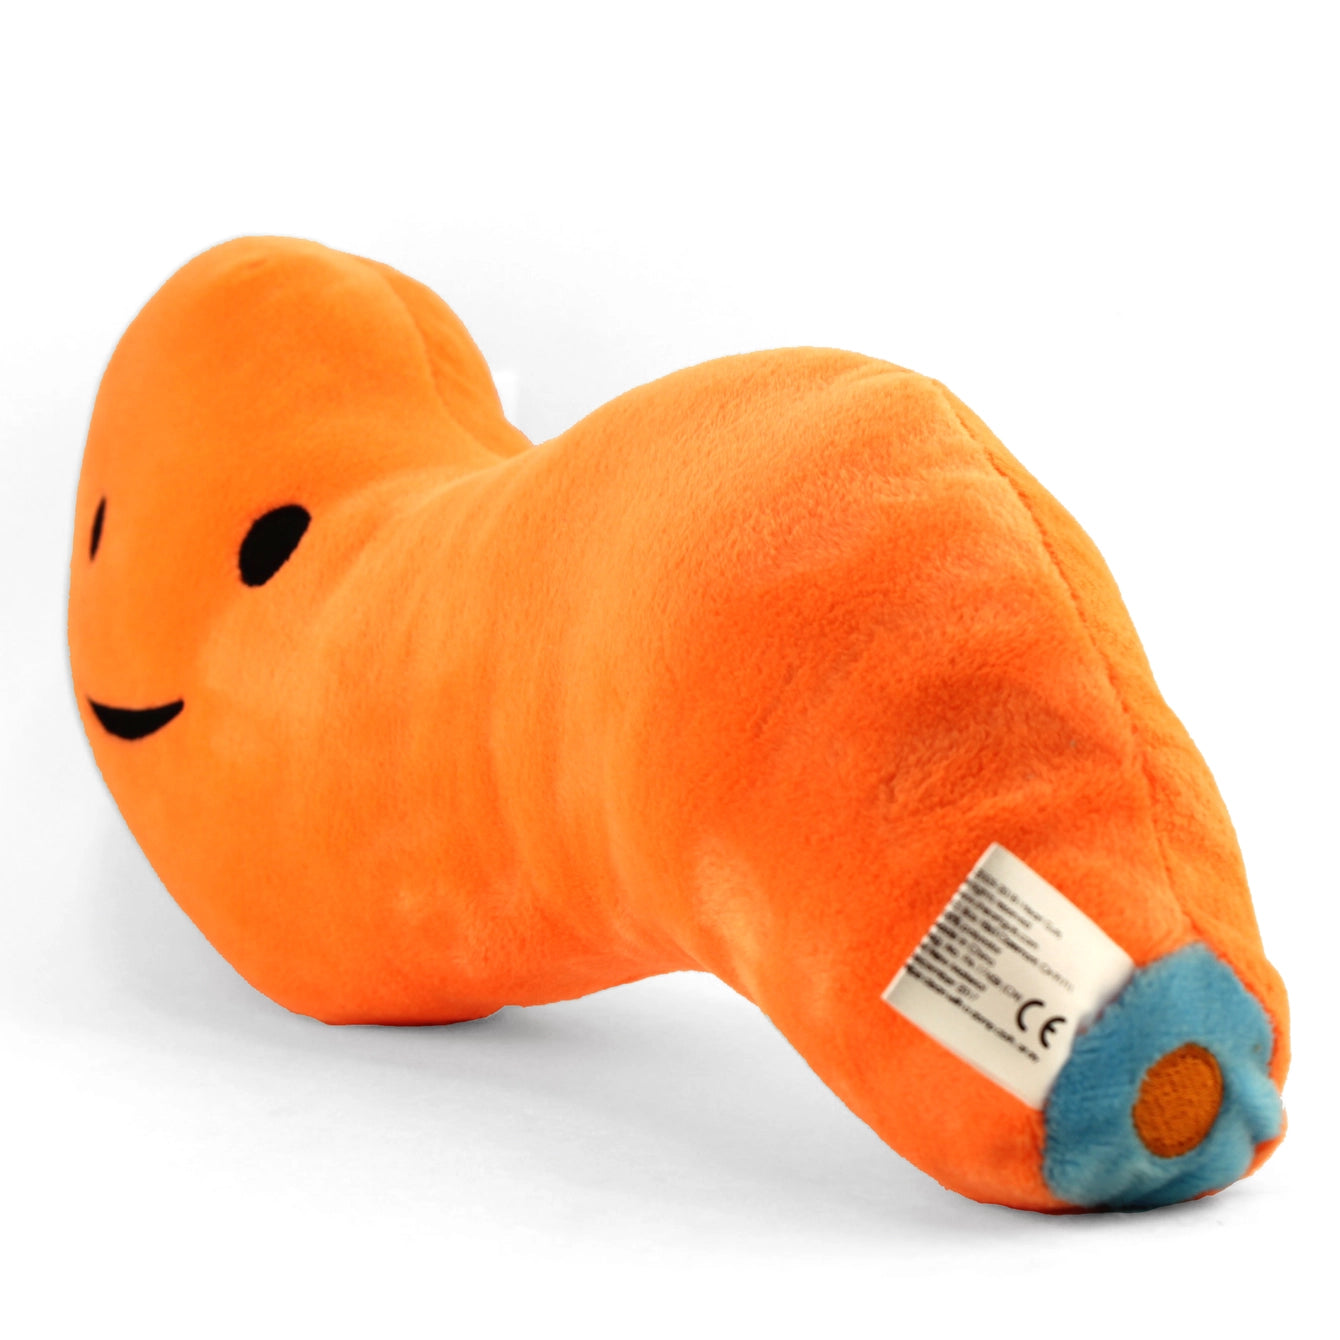 plushie appendix - Feel it in your gut